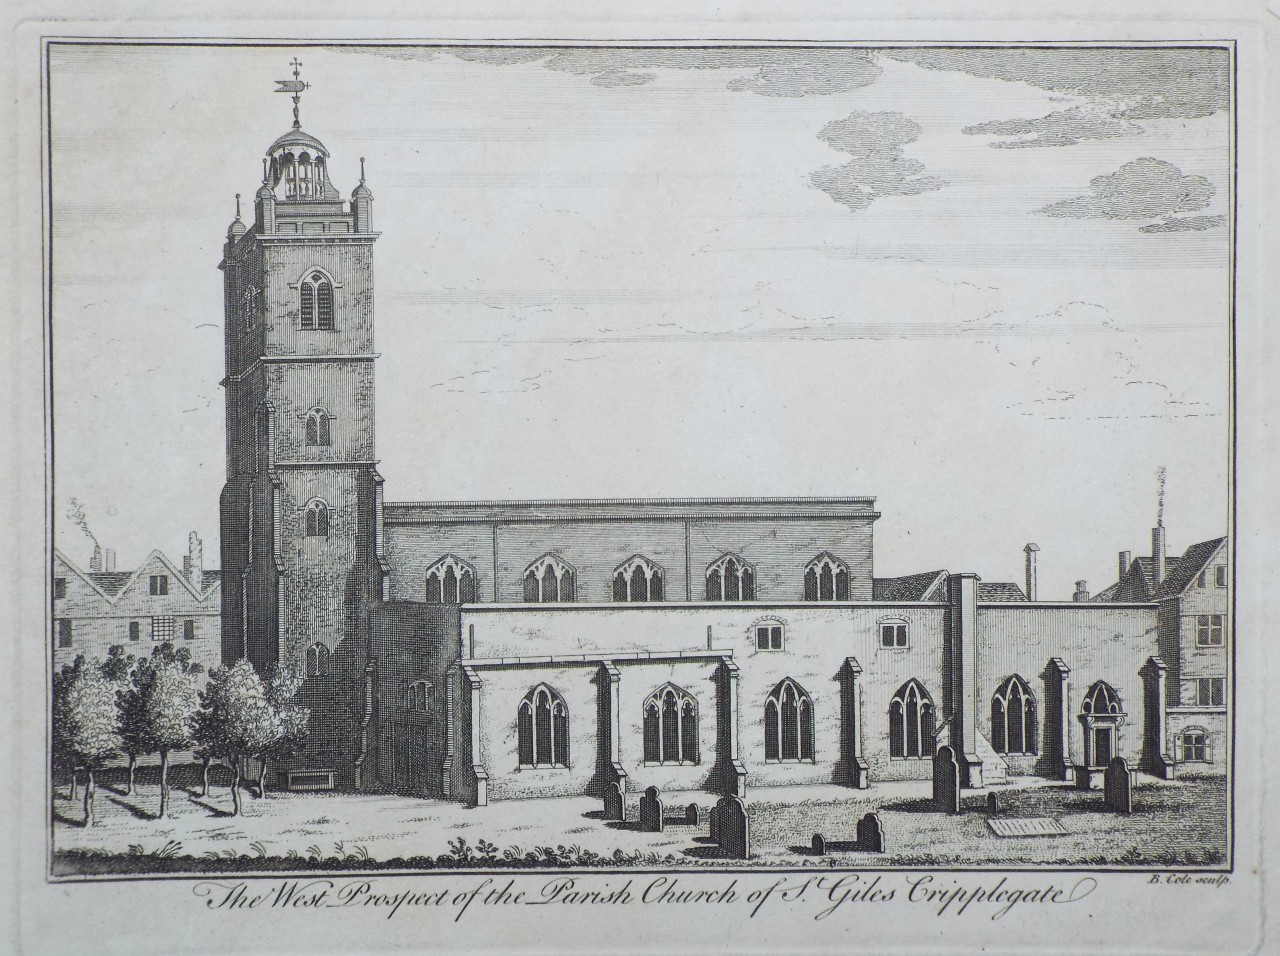 Print - The West Prospect of the Parish Church of St. Giles Cripplegate. - Cole